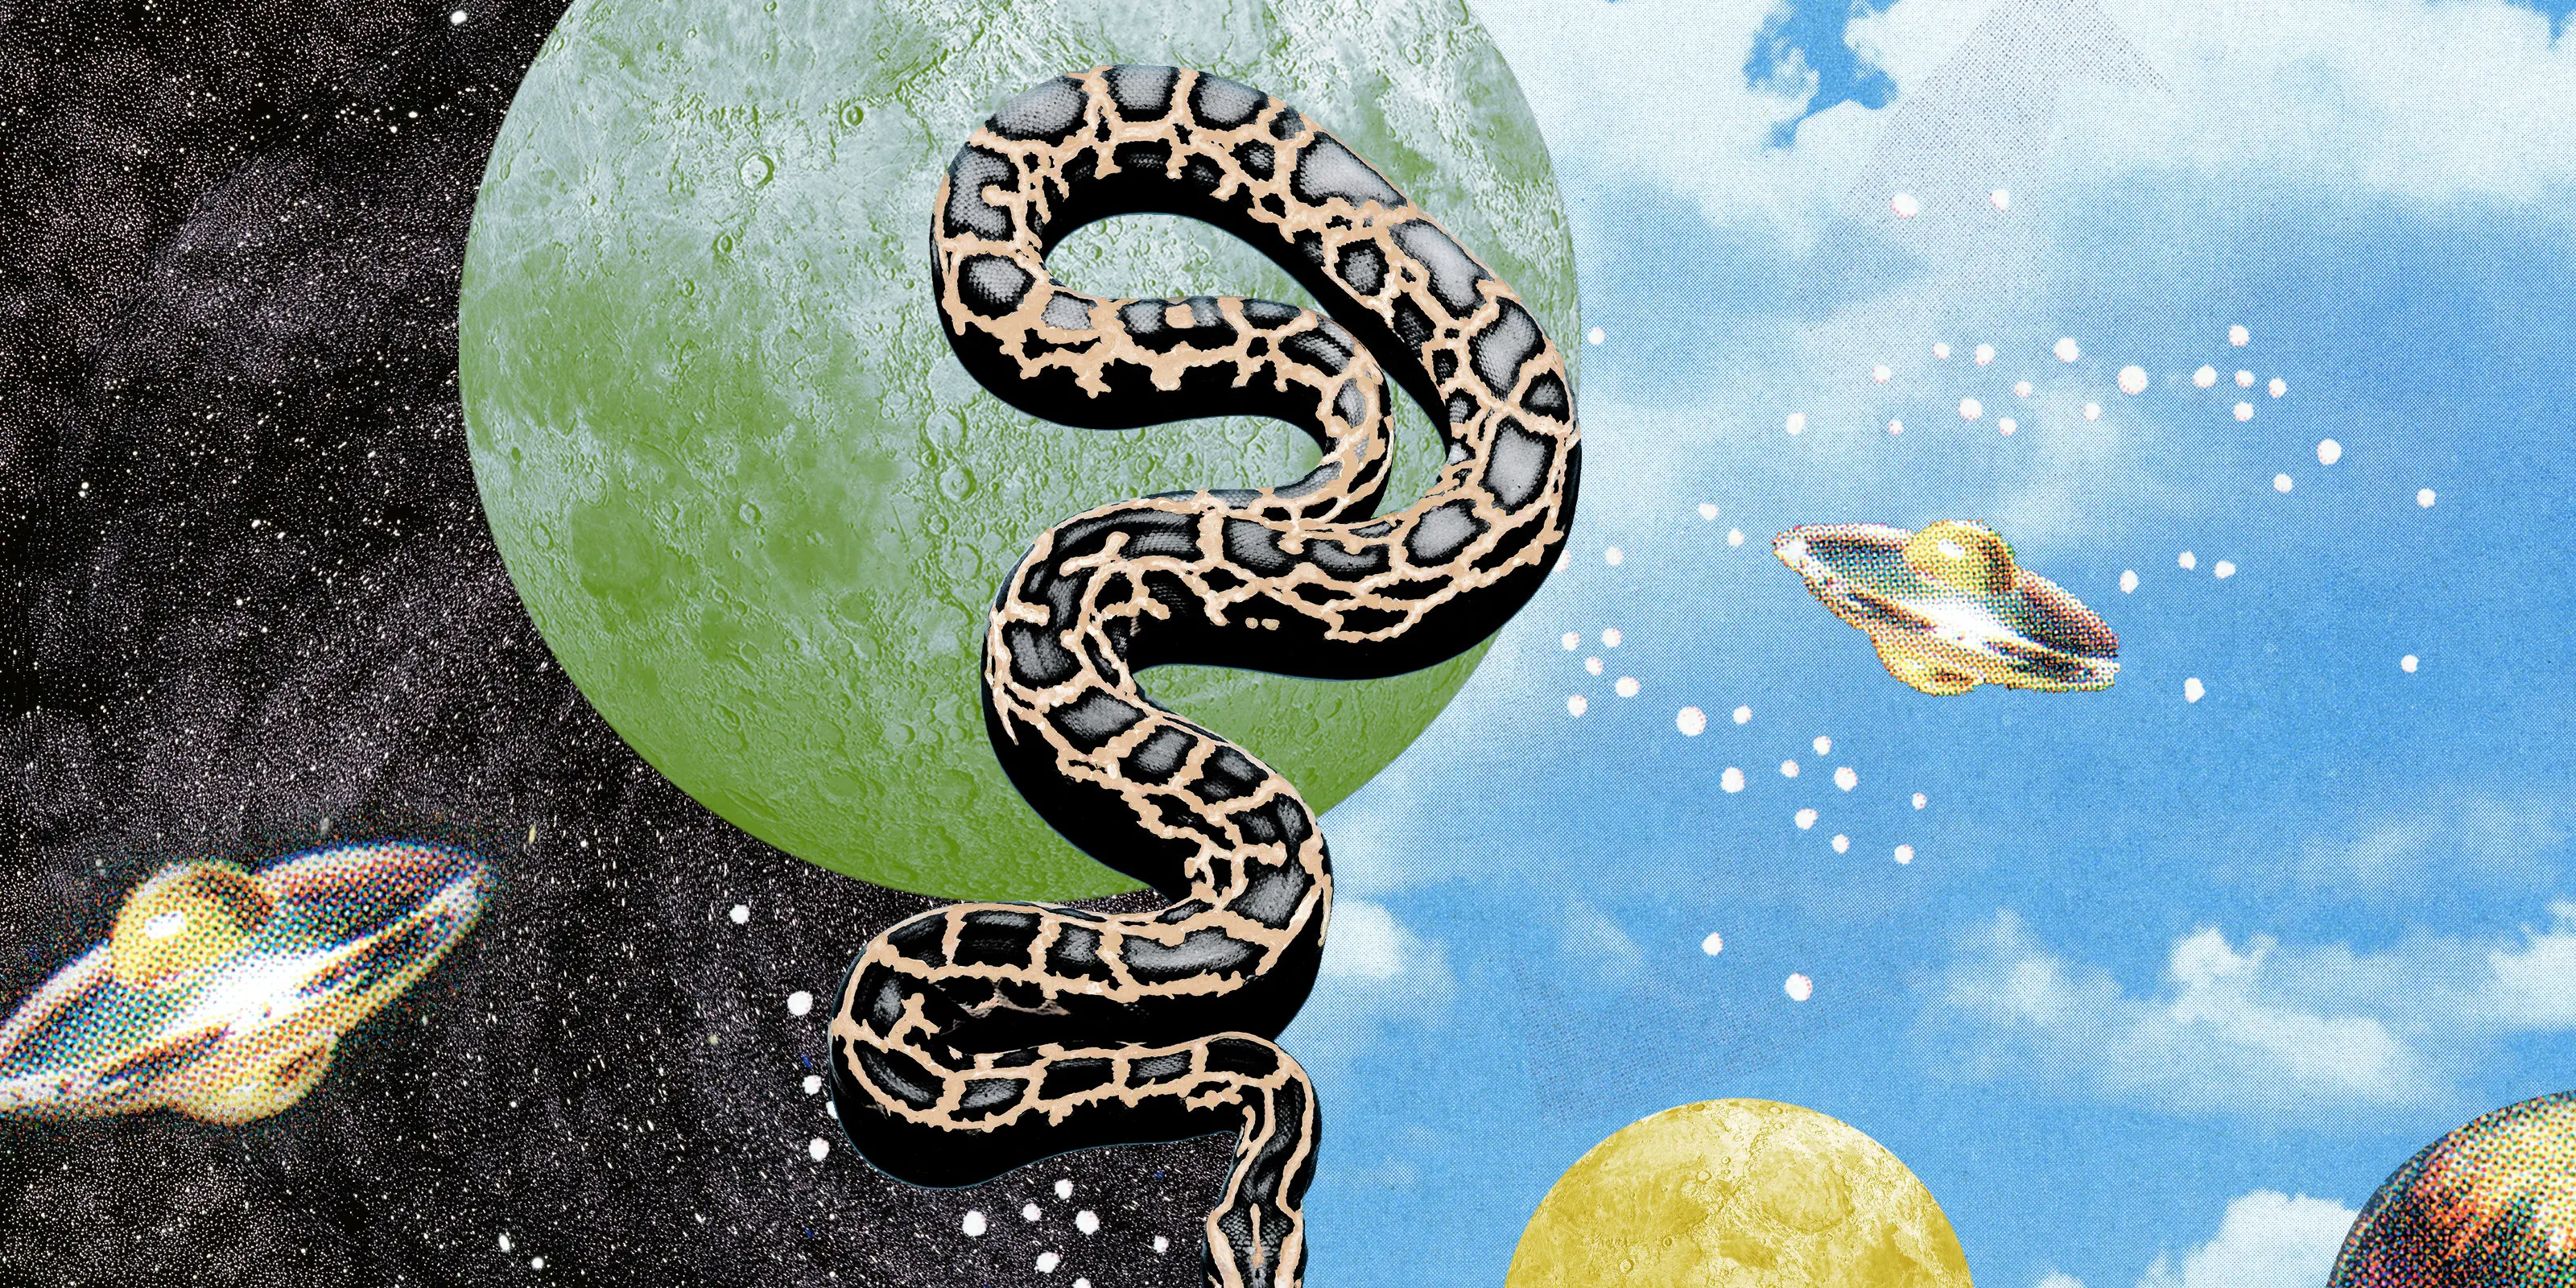 Cultural Meaning Of Snakes In Dreams